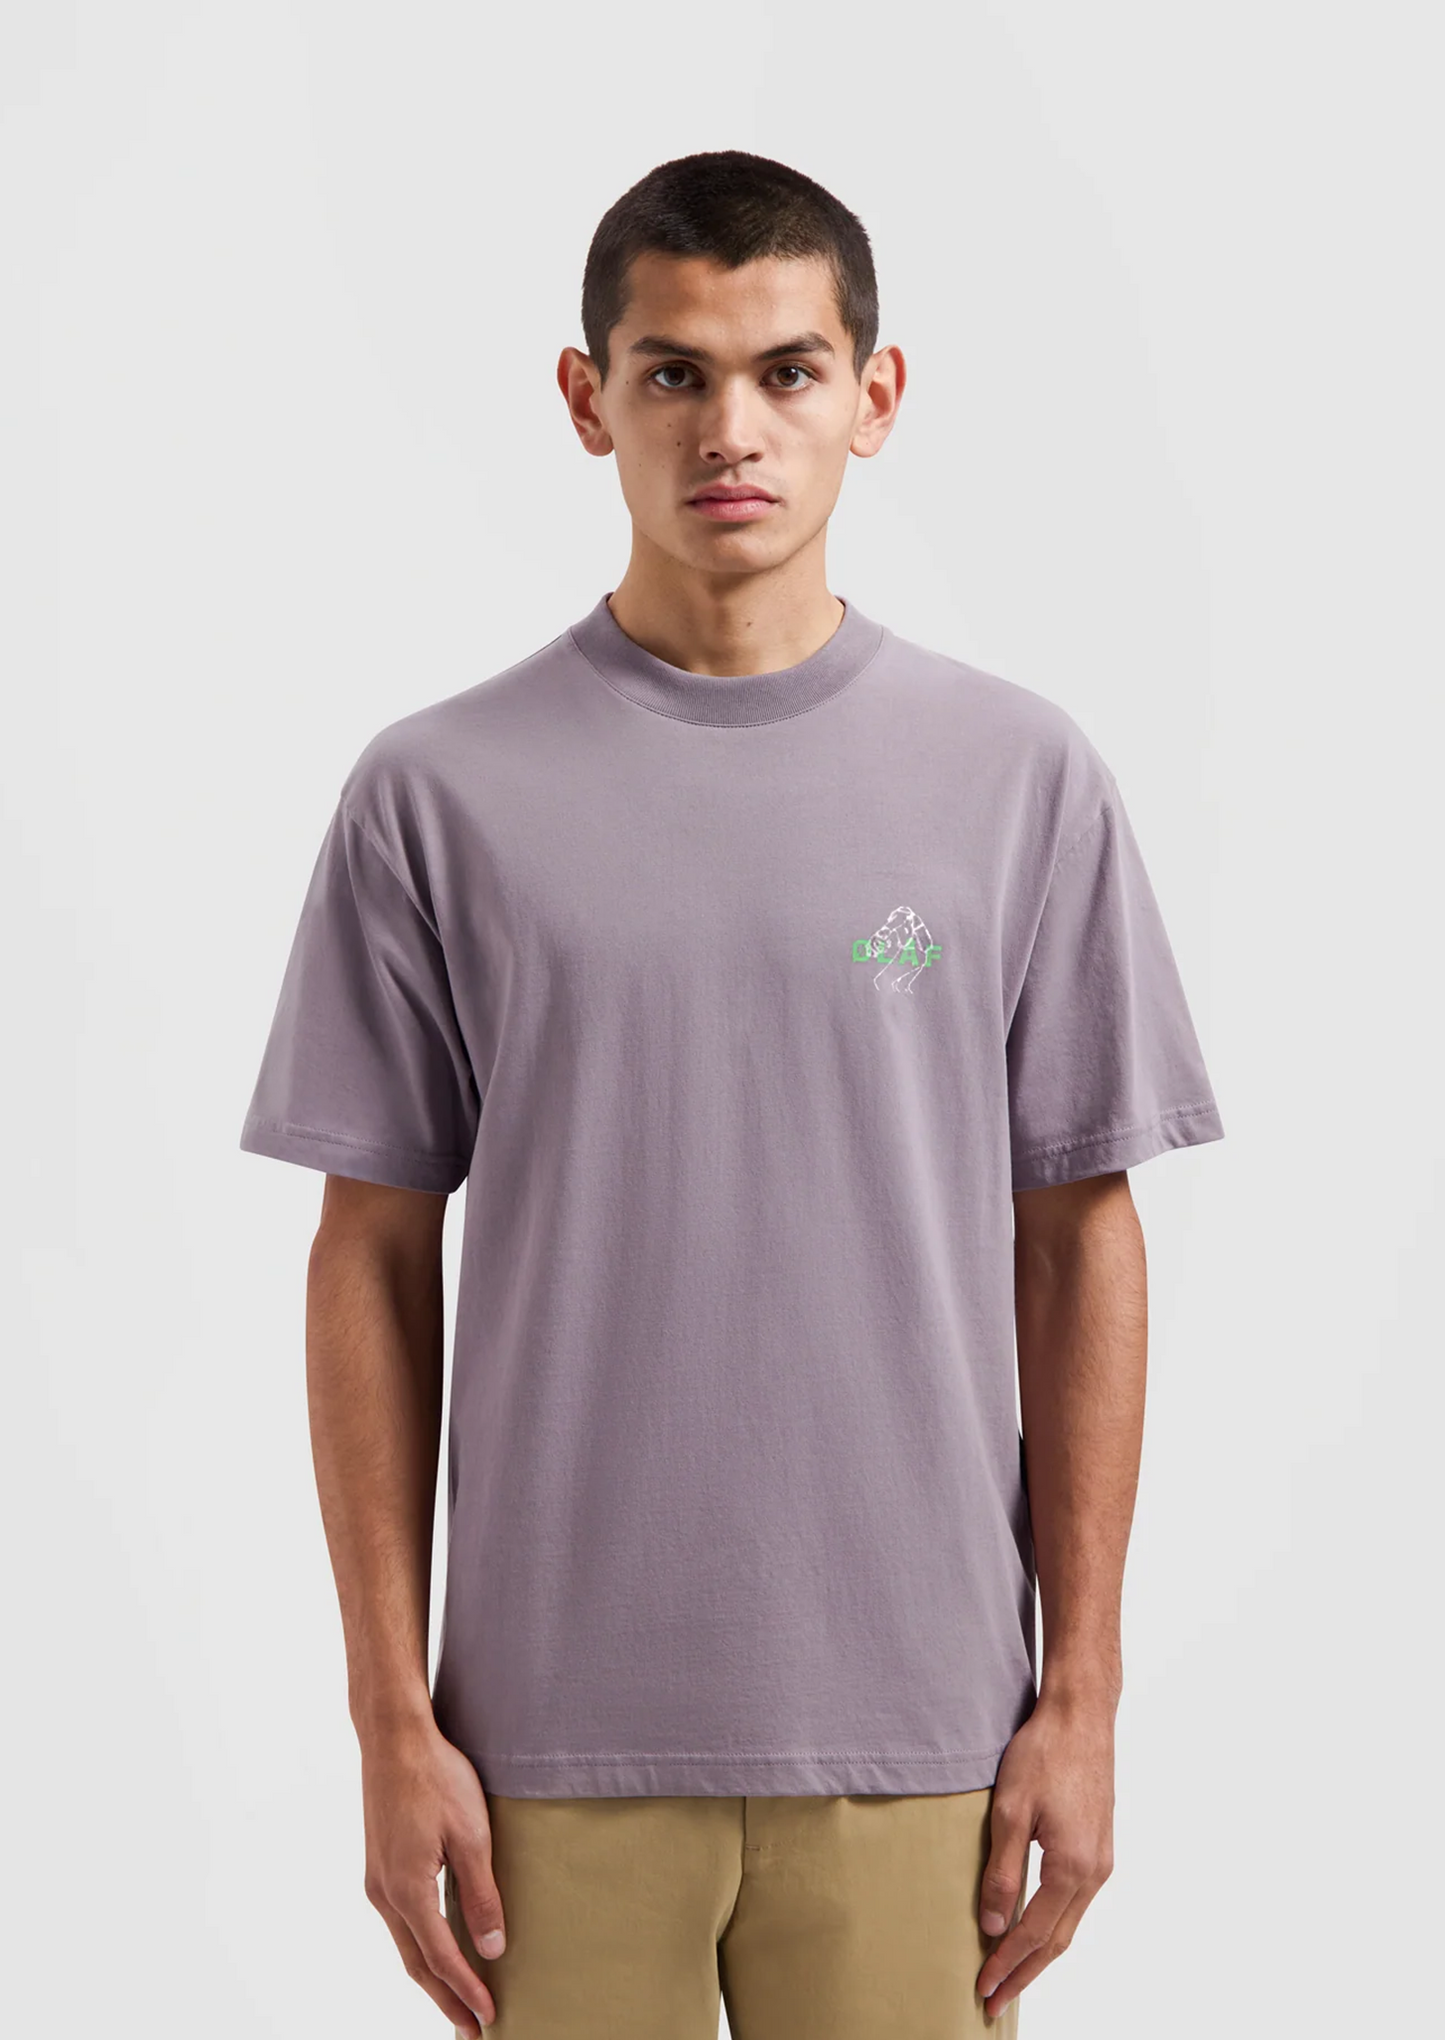 DIVER OUTLINE TEE STONE GRAY